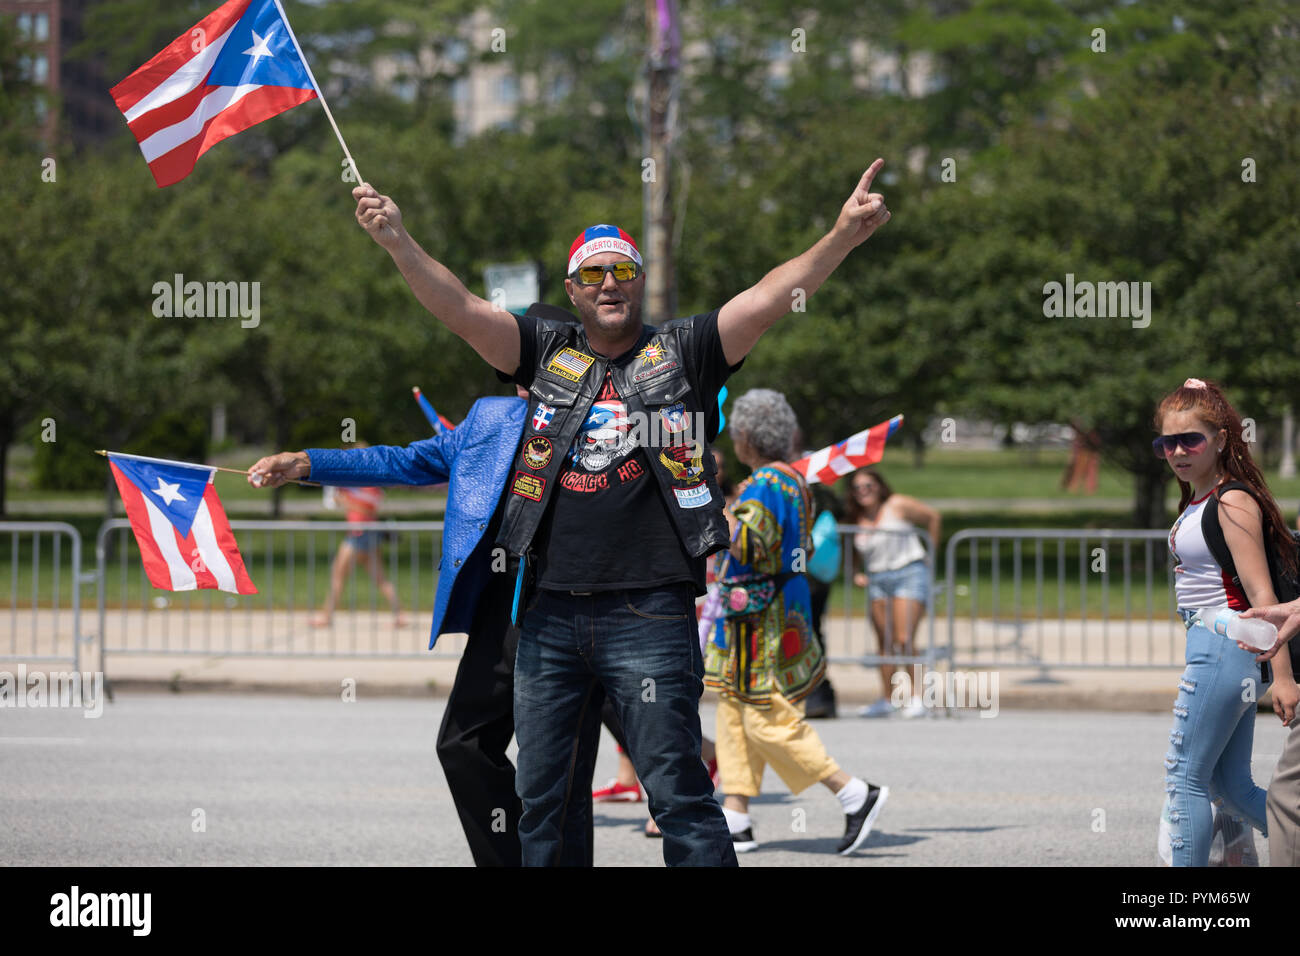 Chicago, Illinois, USA - June 16, 2018: The Puerto Rican Day Parade, Puerto Rican people carrying puerto rican flags celebrating during the parade Stock Photo